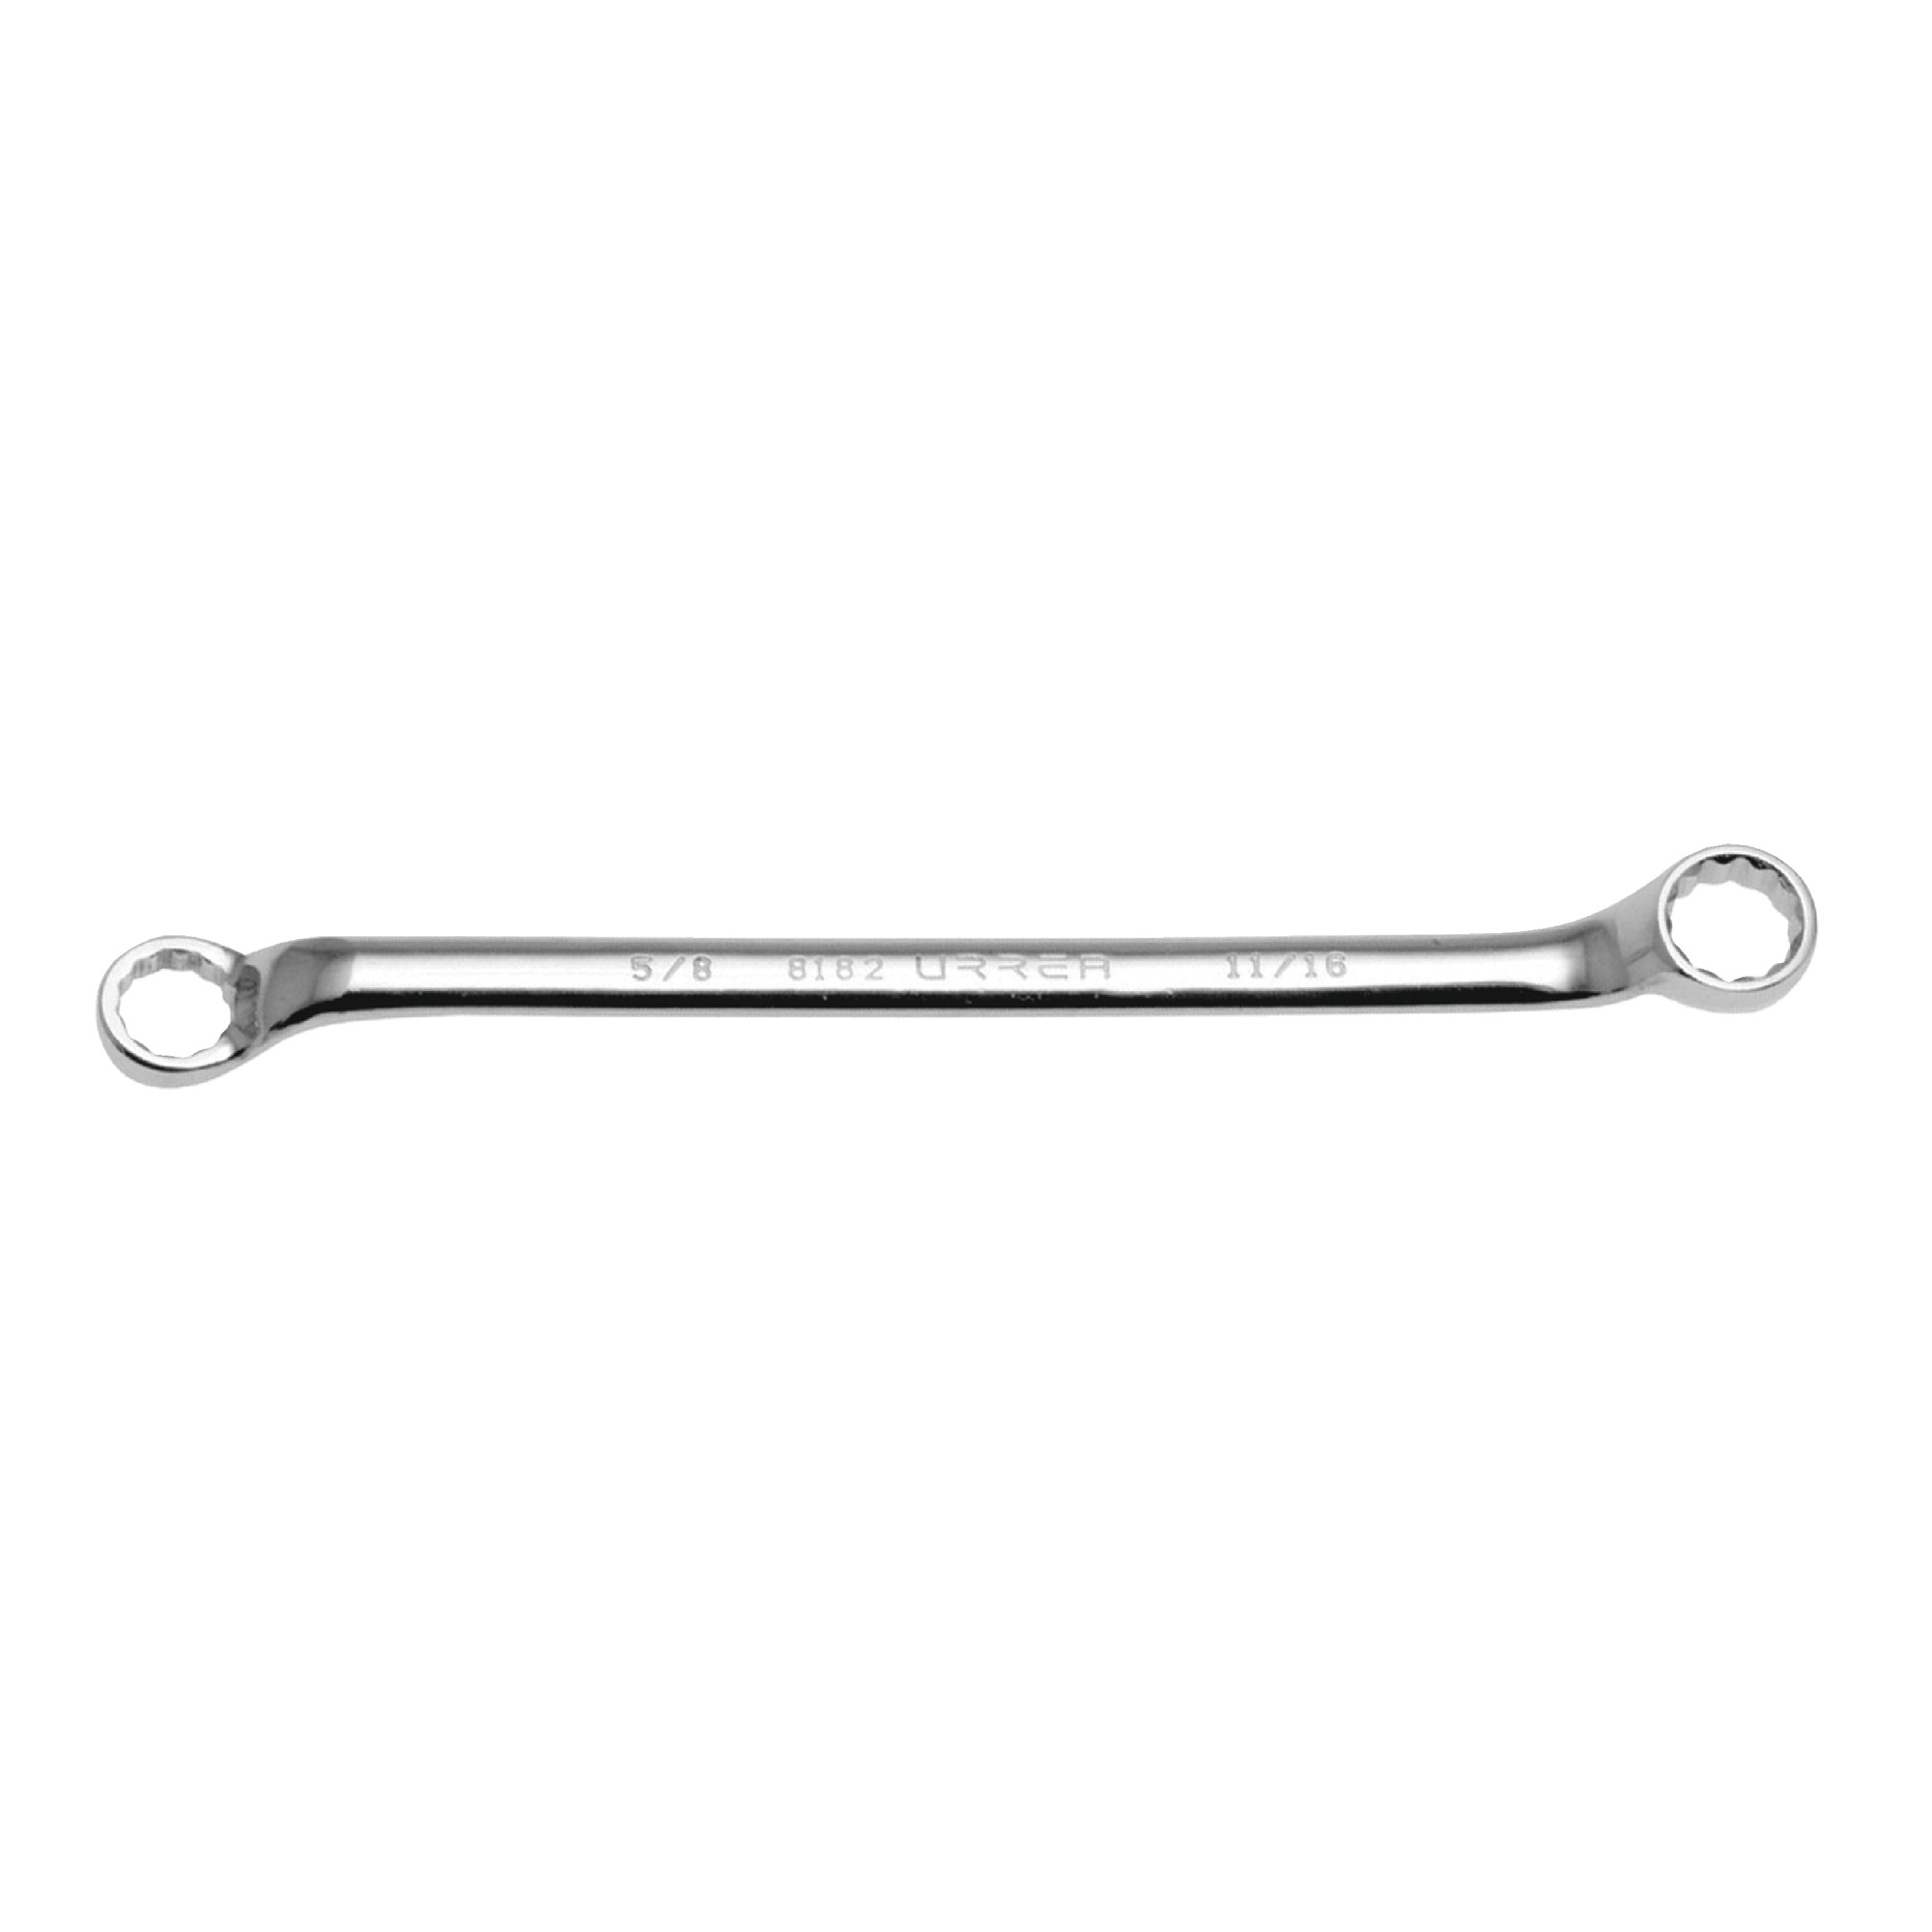 81516 15mm x 16mm Chrome Finish 12 Point Box End Wrench